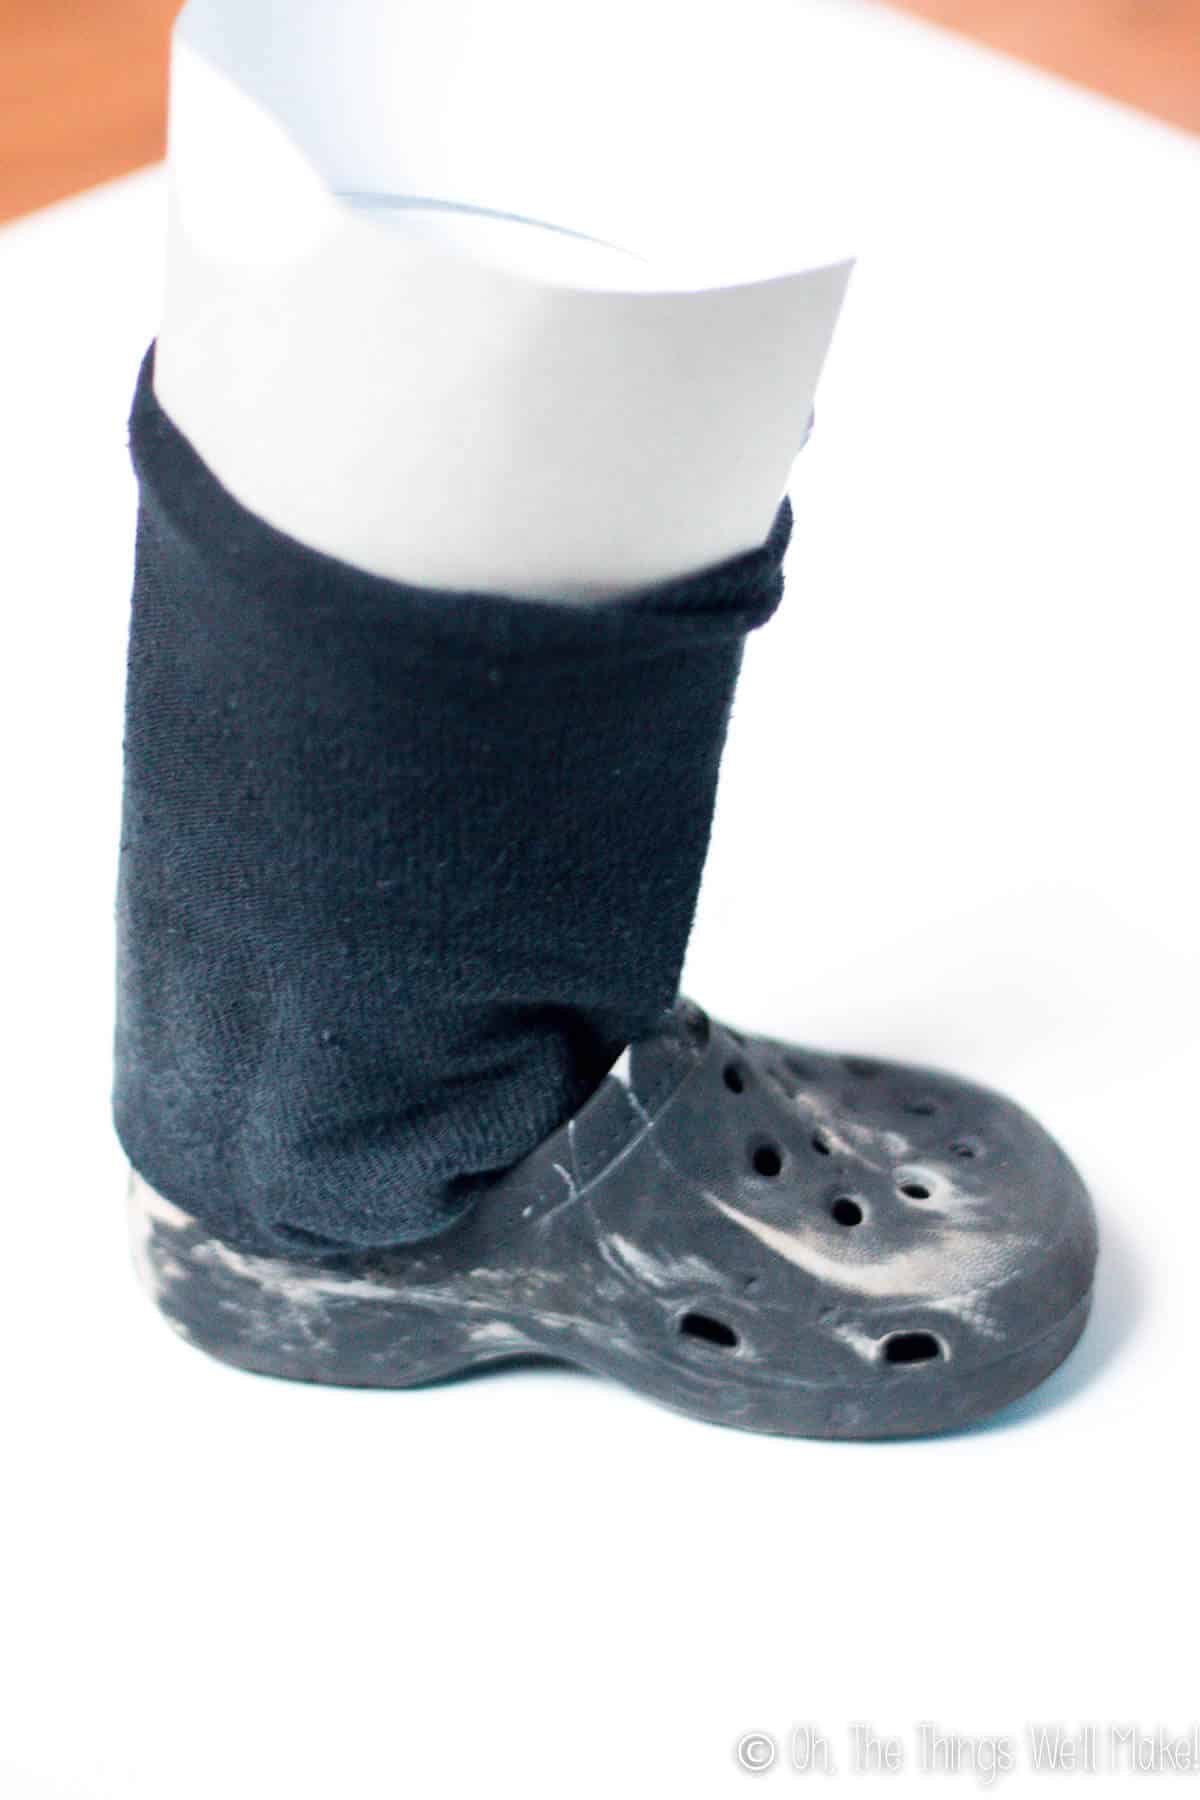 Crocs type shoes with a large sock inside of them which is held up by a cylinder of cardboard in the position of a leg/foot.